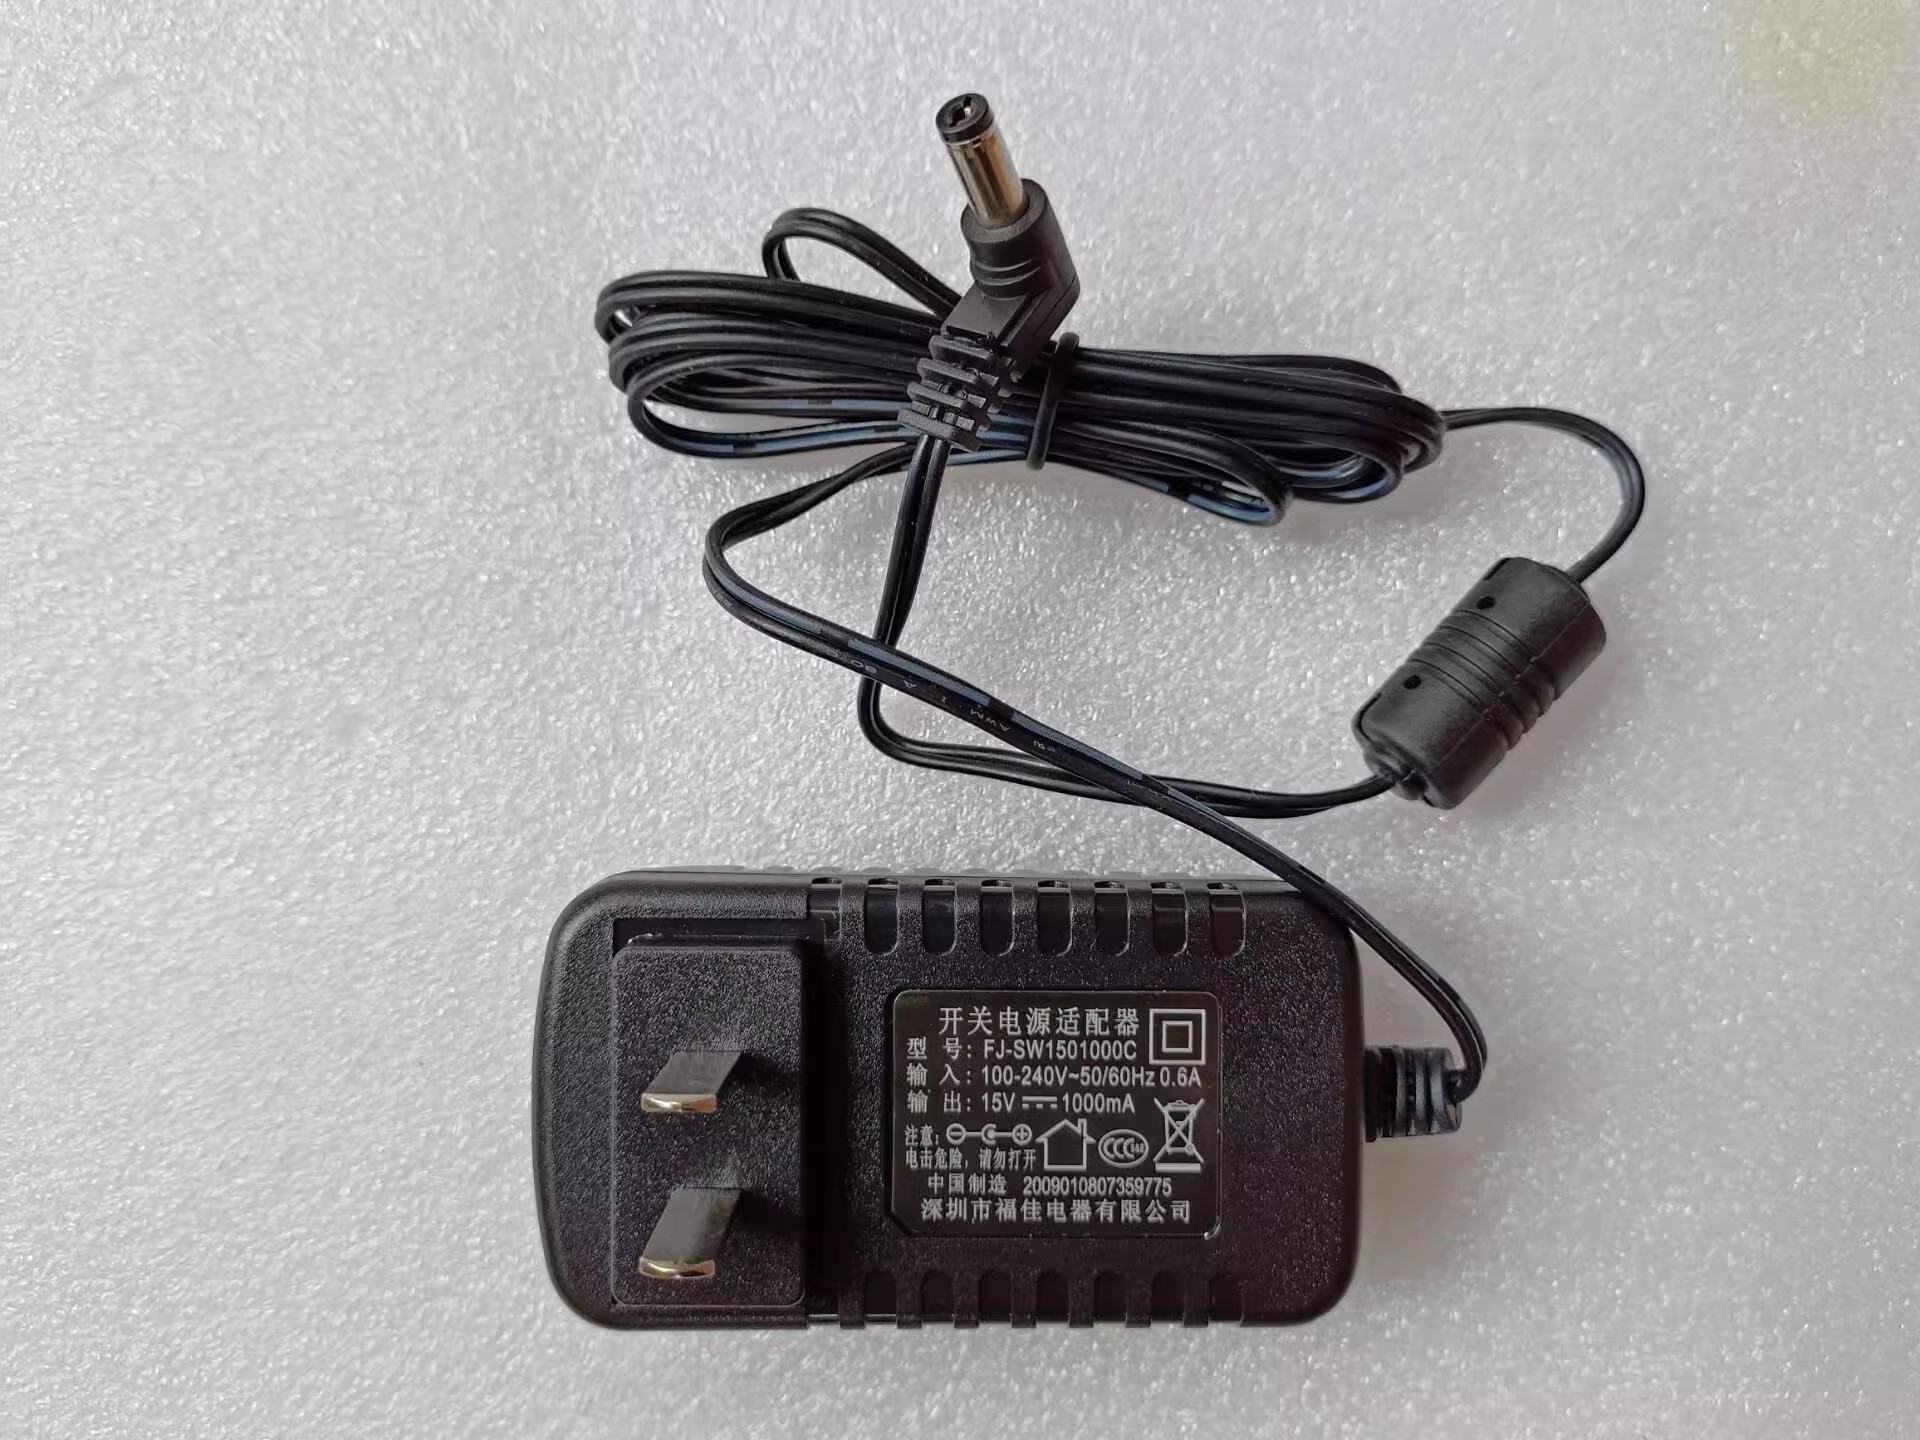 *Brand NEW*FJ-SW1501000C DP-163 DP320 FJ-SW1210X 15V 1A AC DC ADAPTHE POWER Supply - Click Image to Close